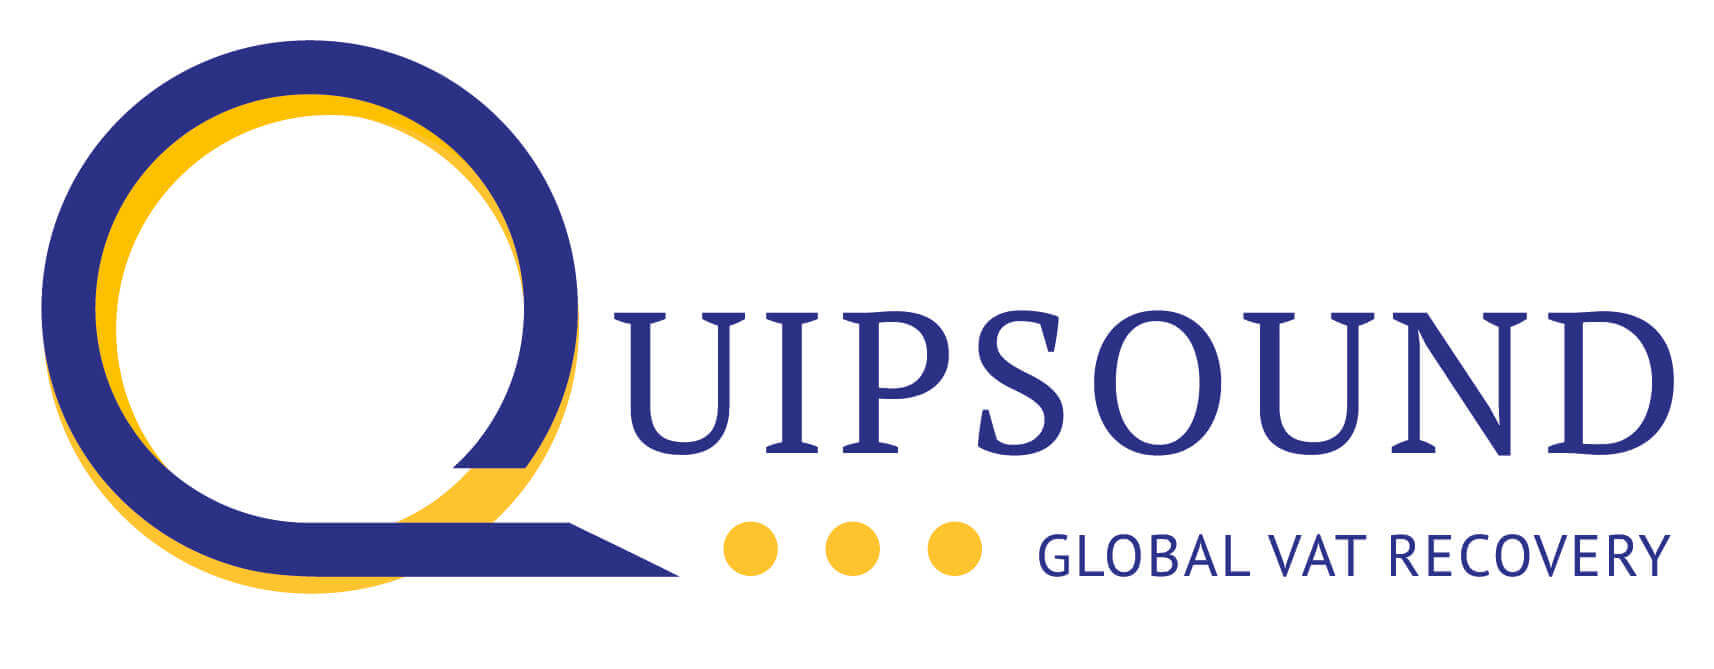 Quipsound global vat recovery logo